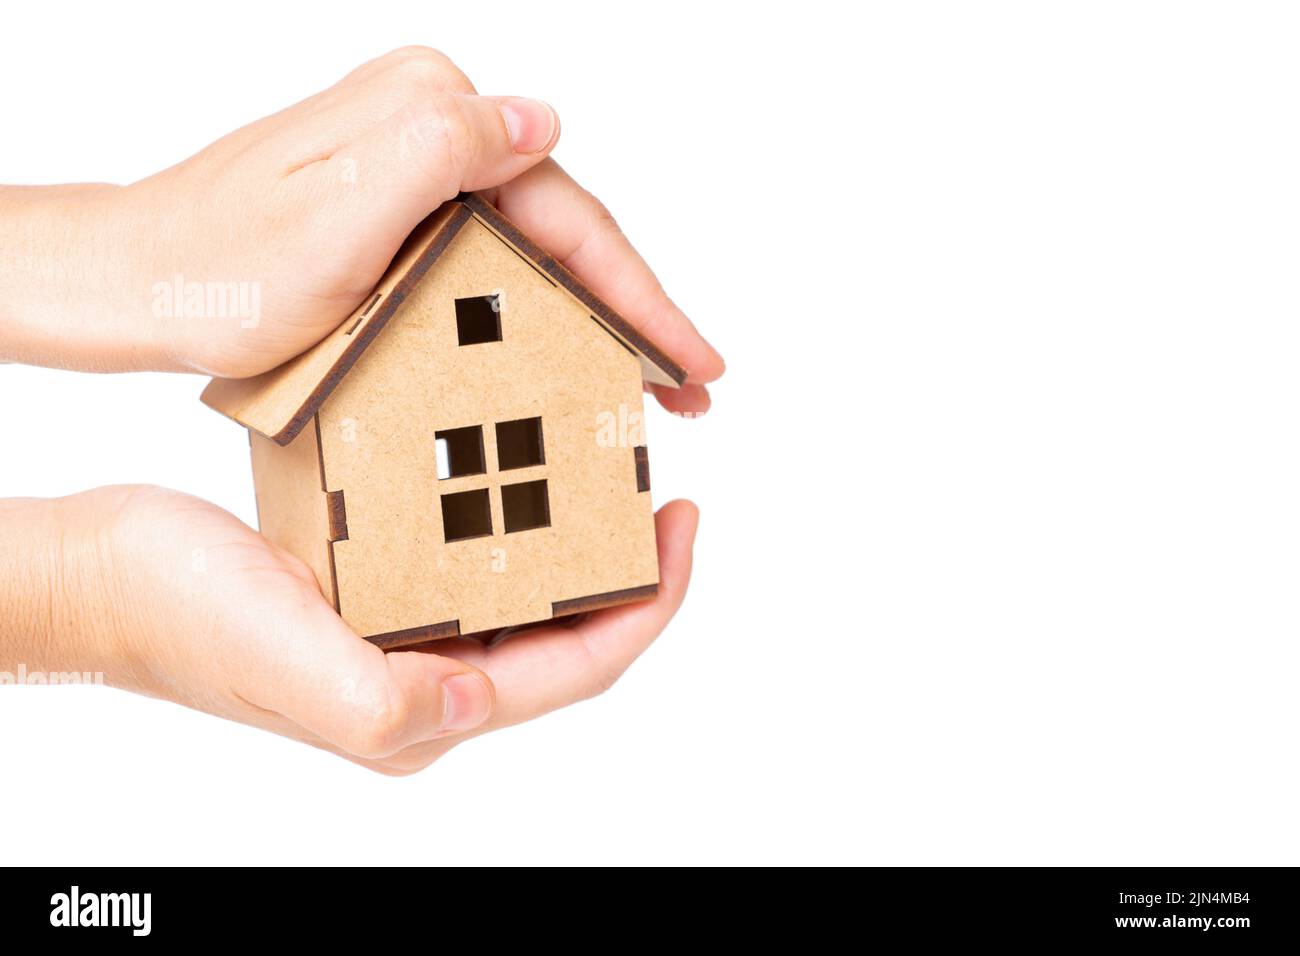 Holding a miniature wooden house model with both hands isolated on neutral background. Home insurance and care concept. Stock Photo